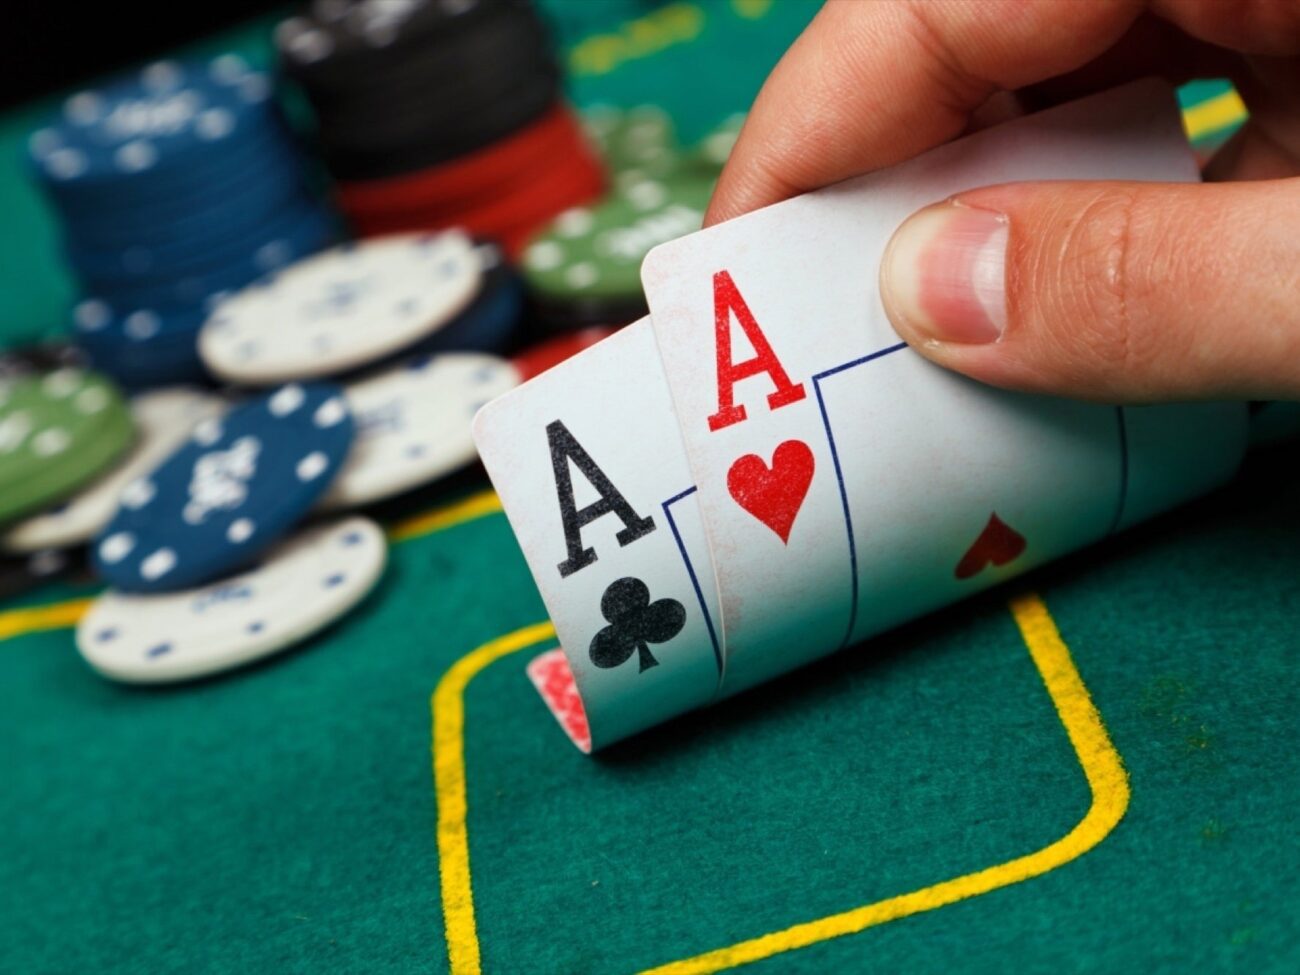 Poker is a popular theme in the U.S. movie industry and often a useful plot device. Here are the weirdest myths.